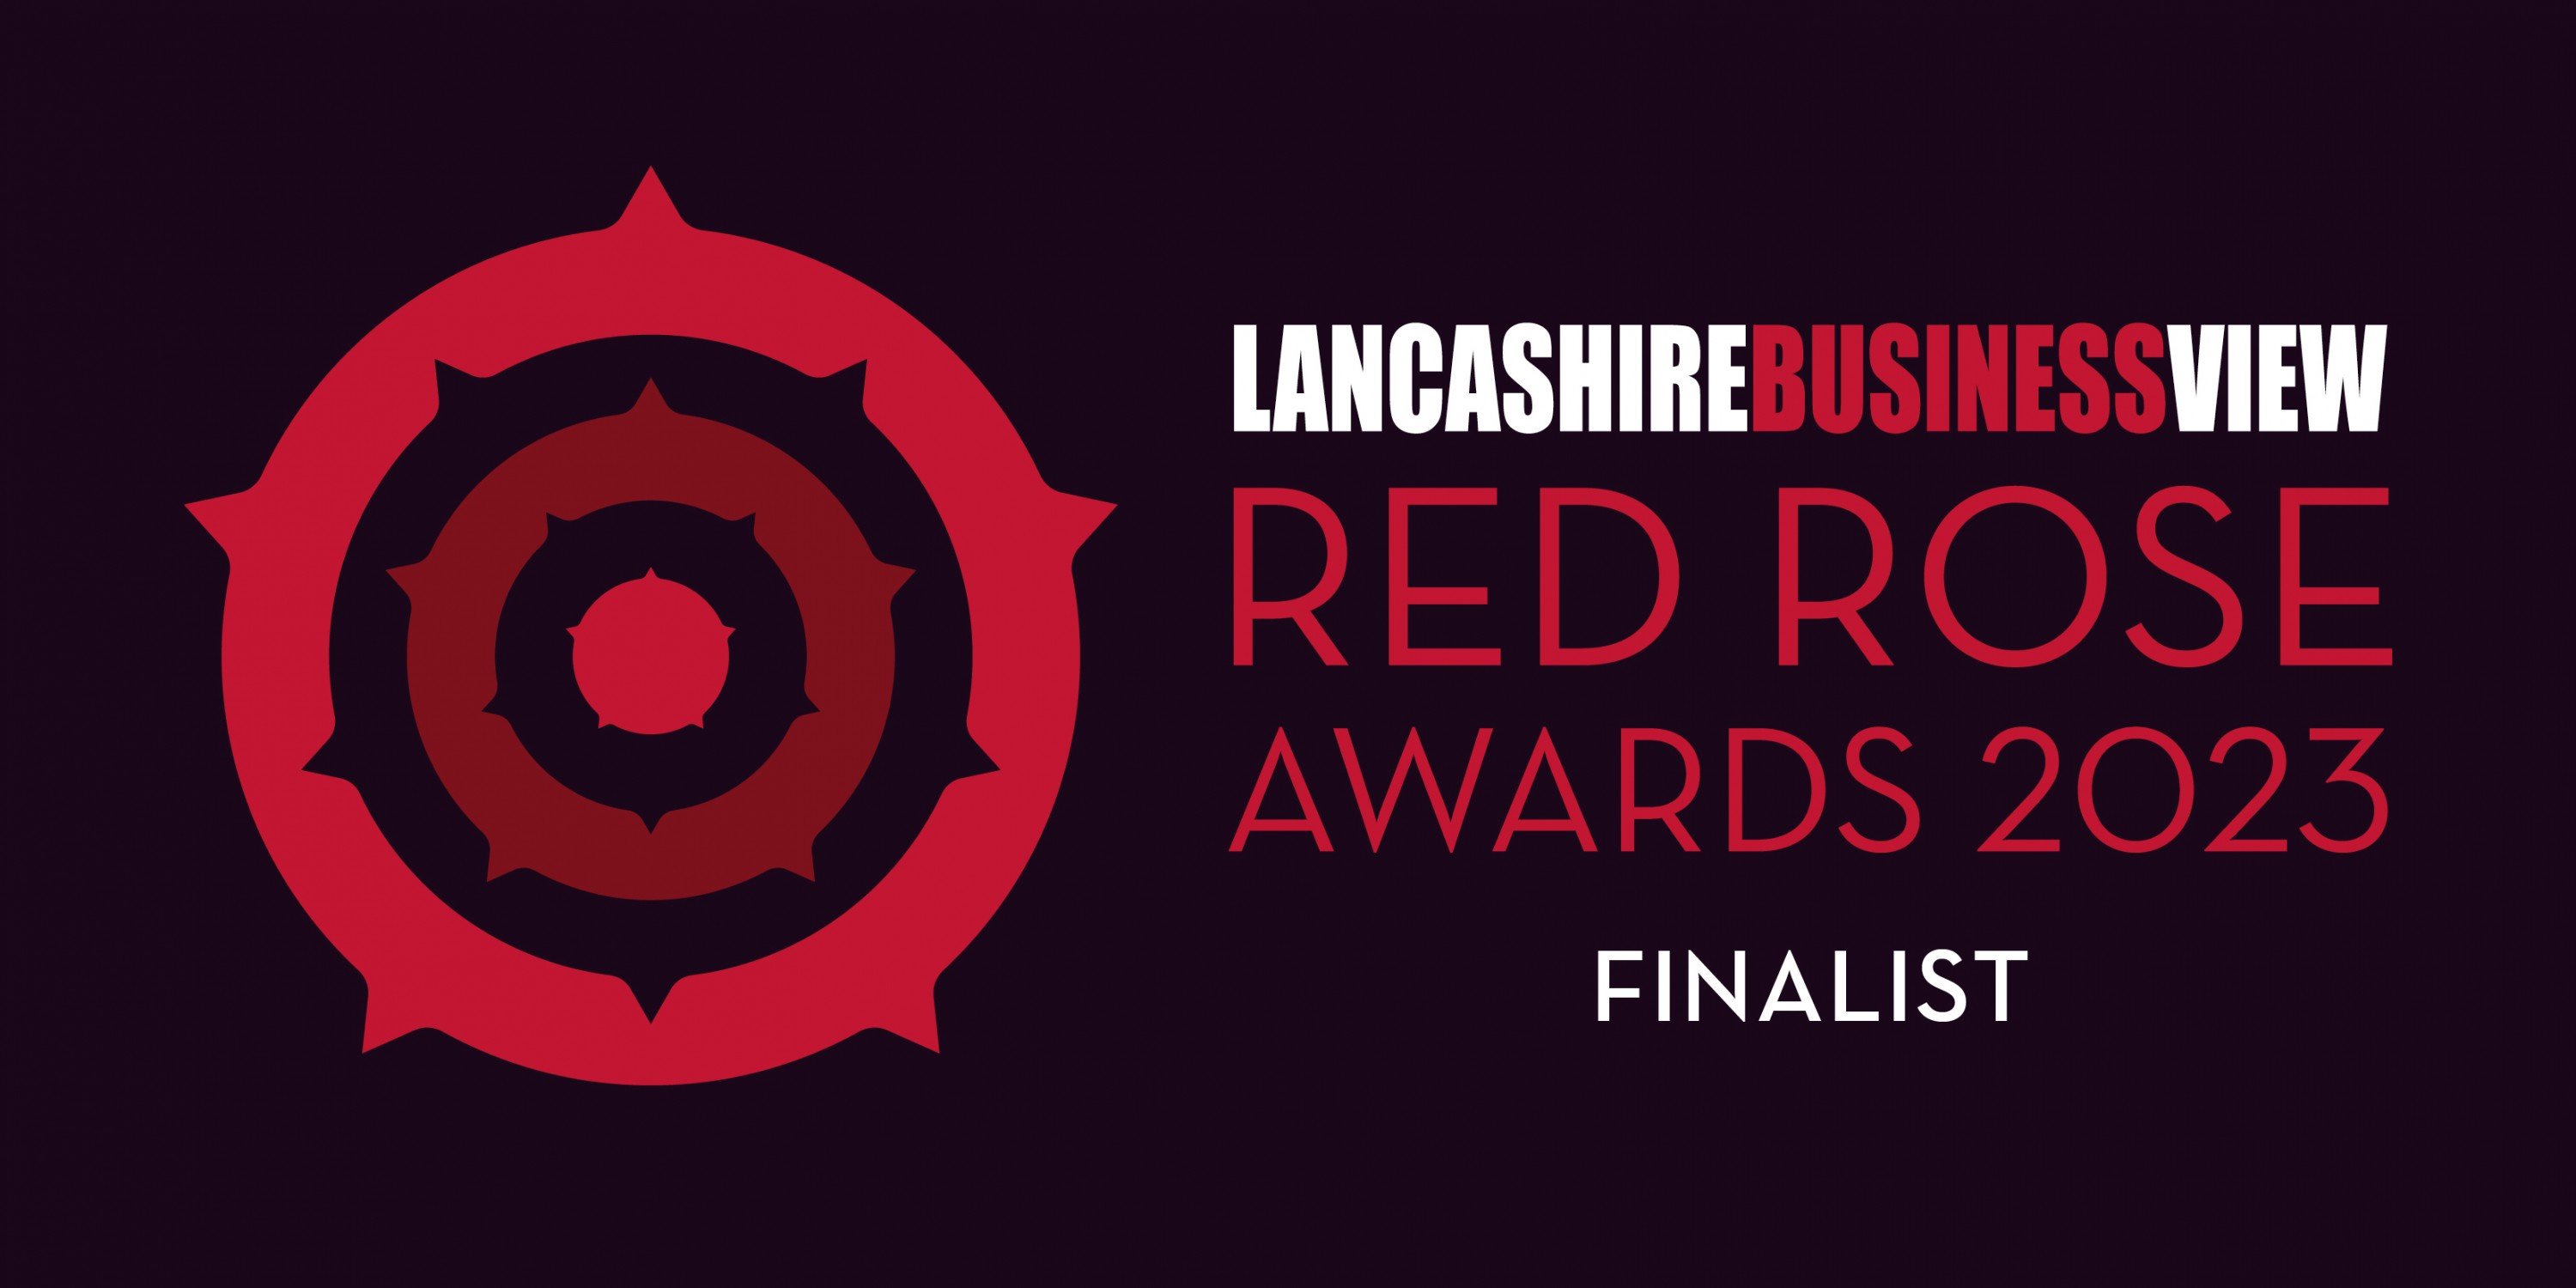 Trident shortlisted for a 2023 Red Rose Award for second year running